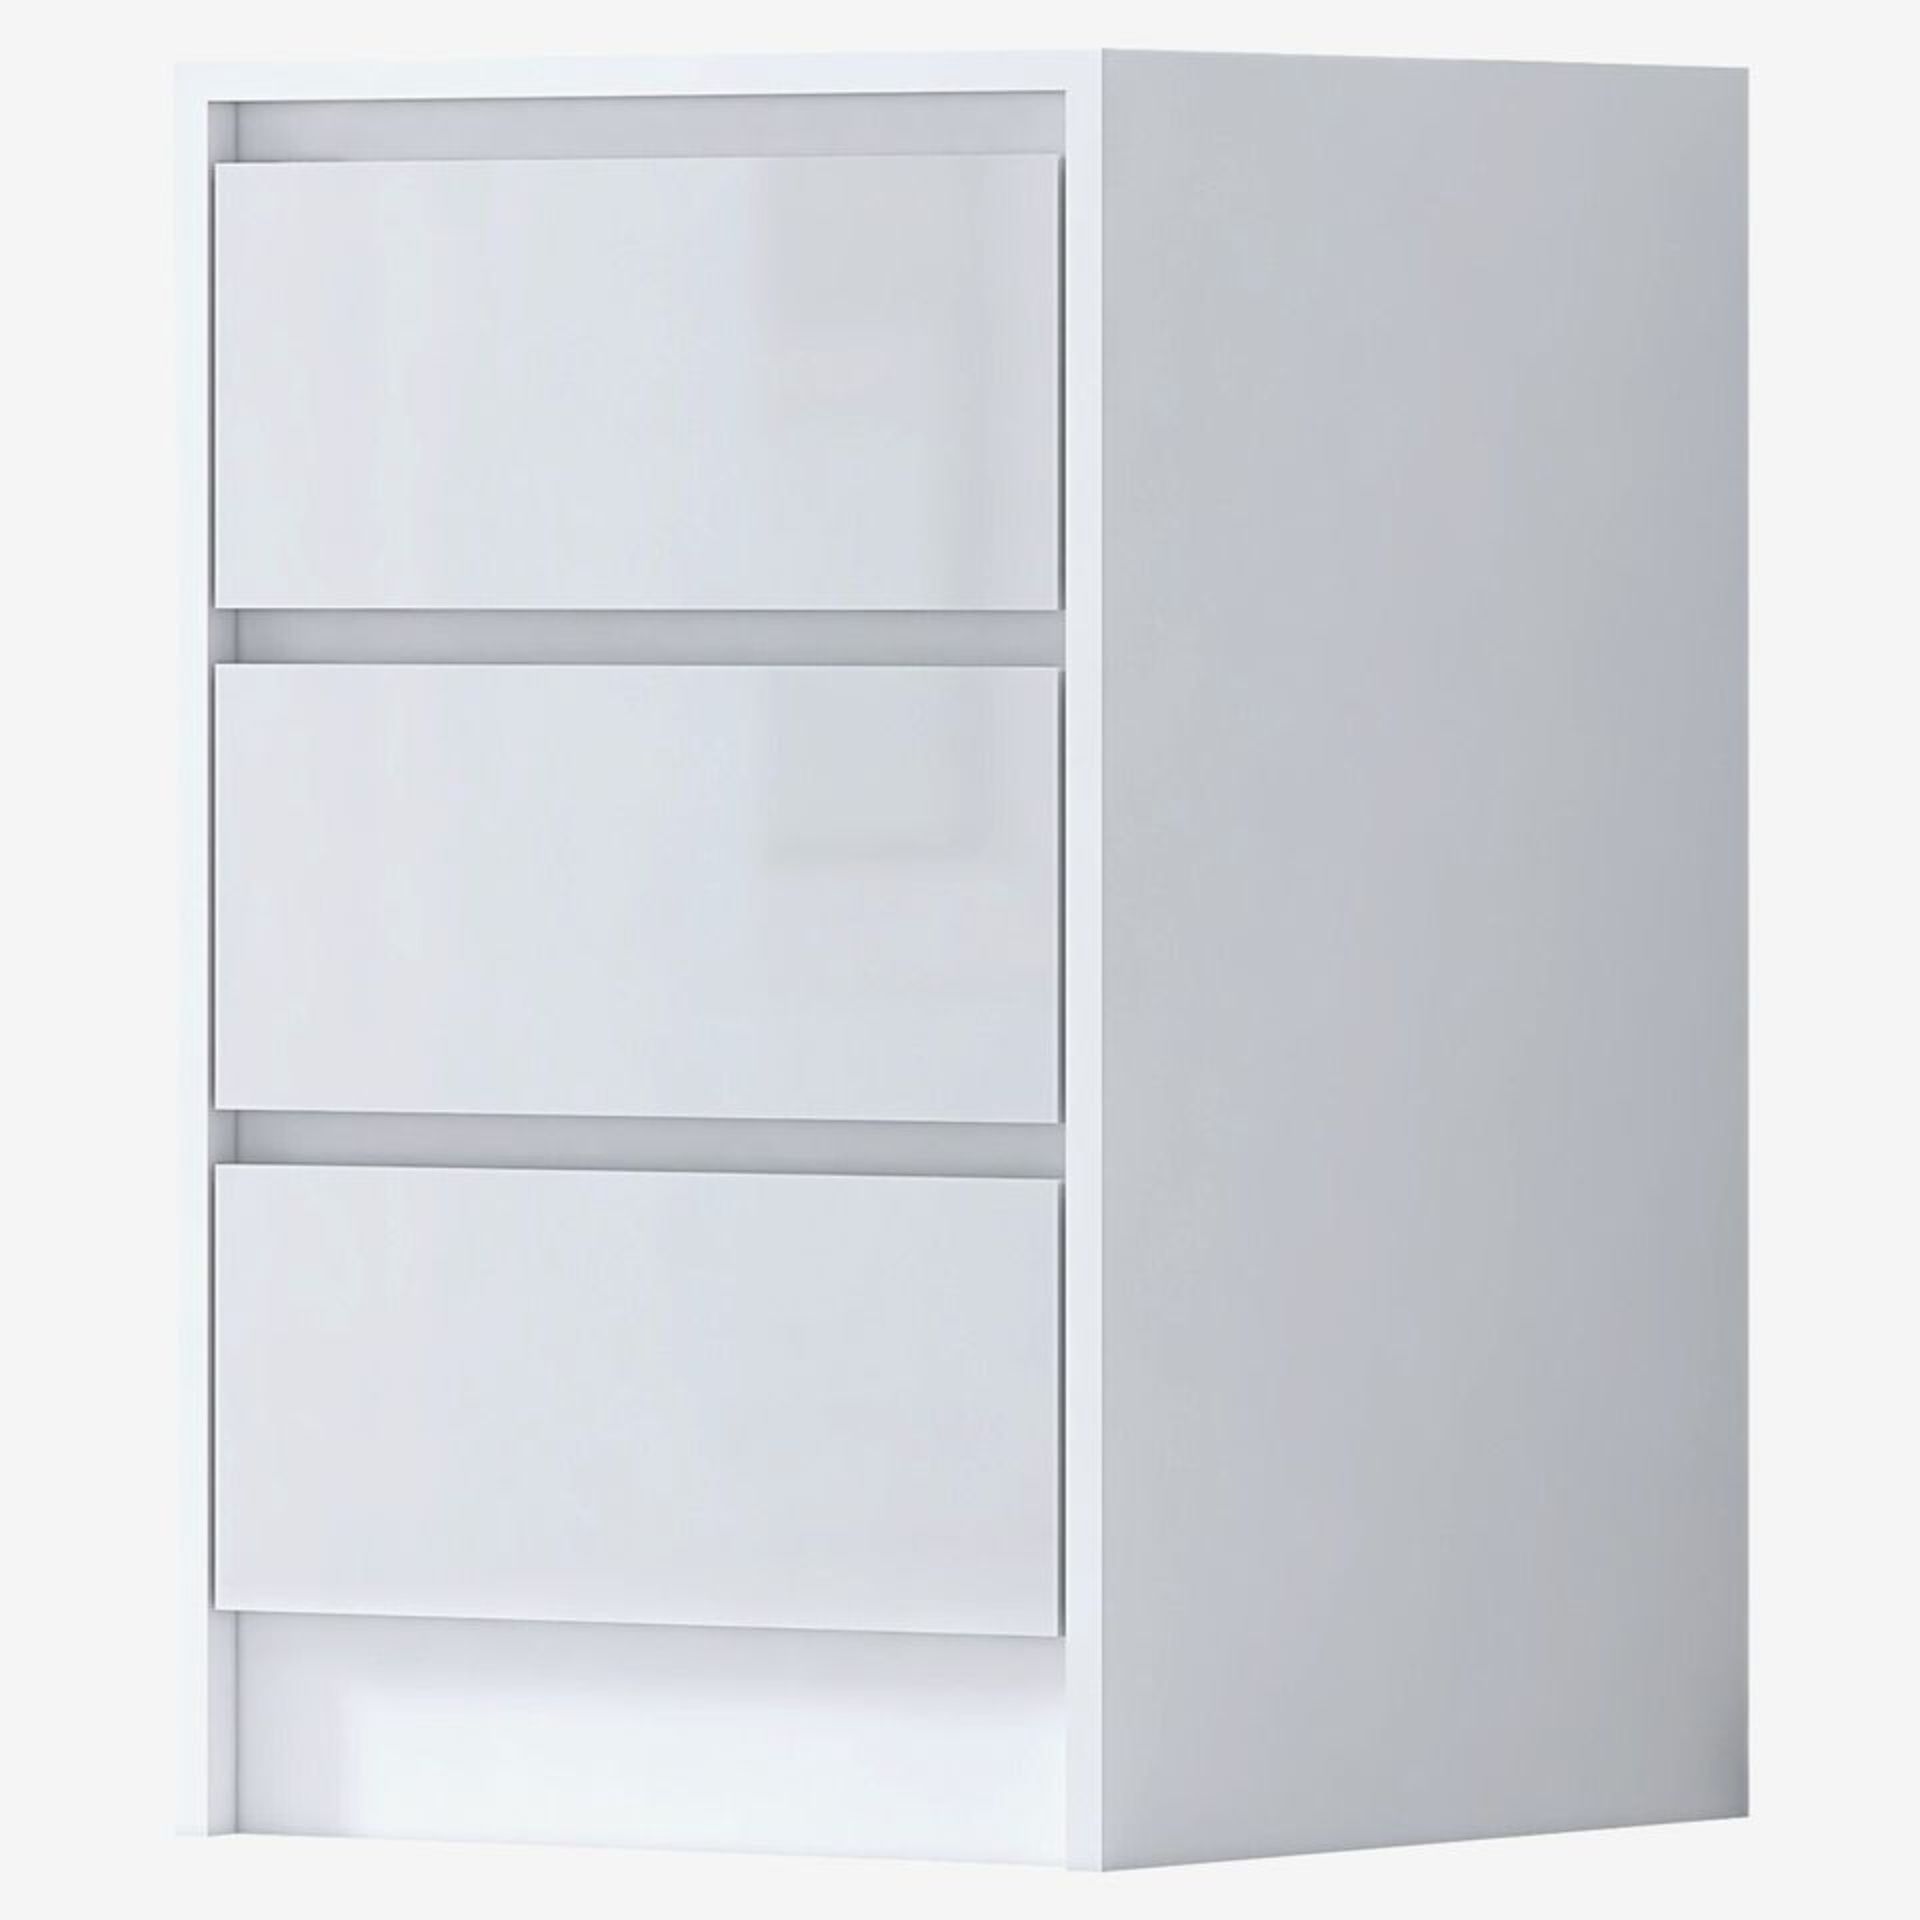 PAIR OF HIGH GLOSS WHITE BEDSIDE CABINET UNIT MODERN HANDLELESS DESIGN - H64CM X W40CM - Image 7 of 9